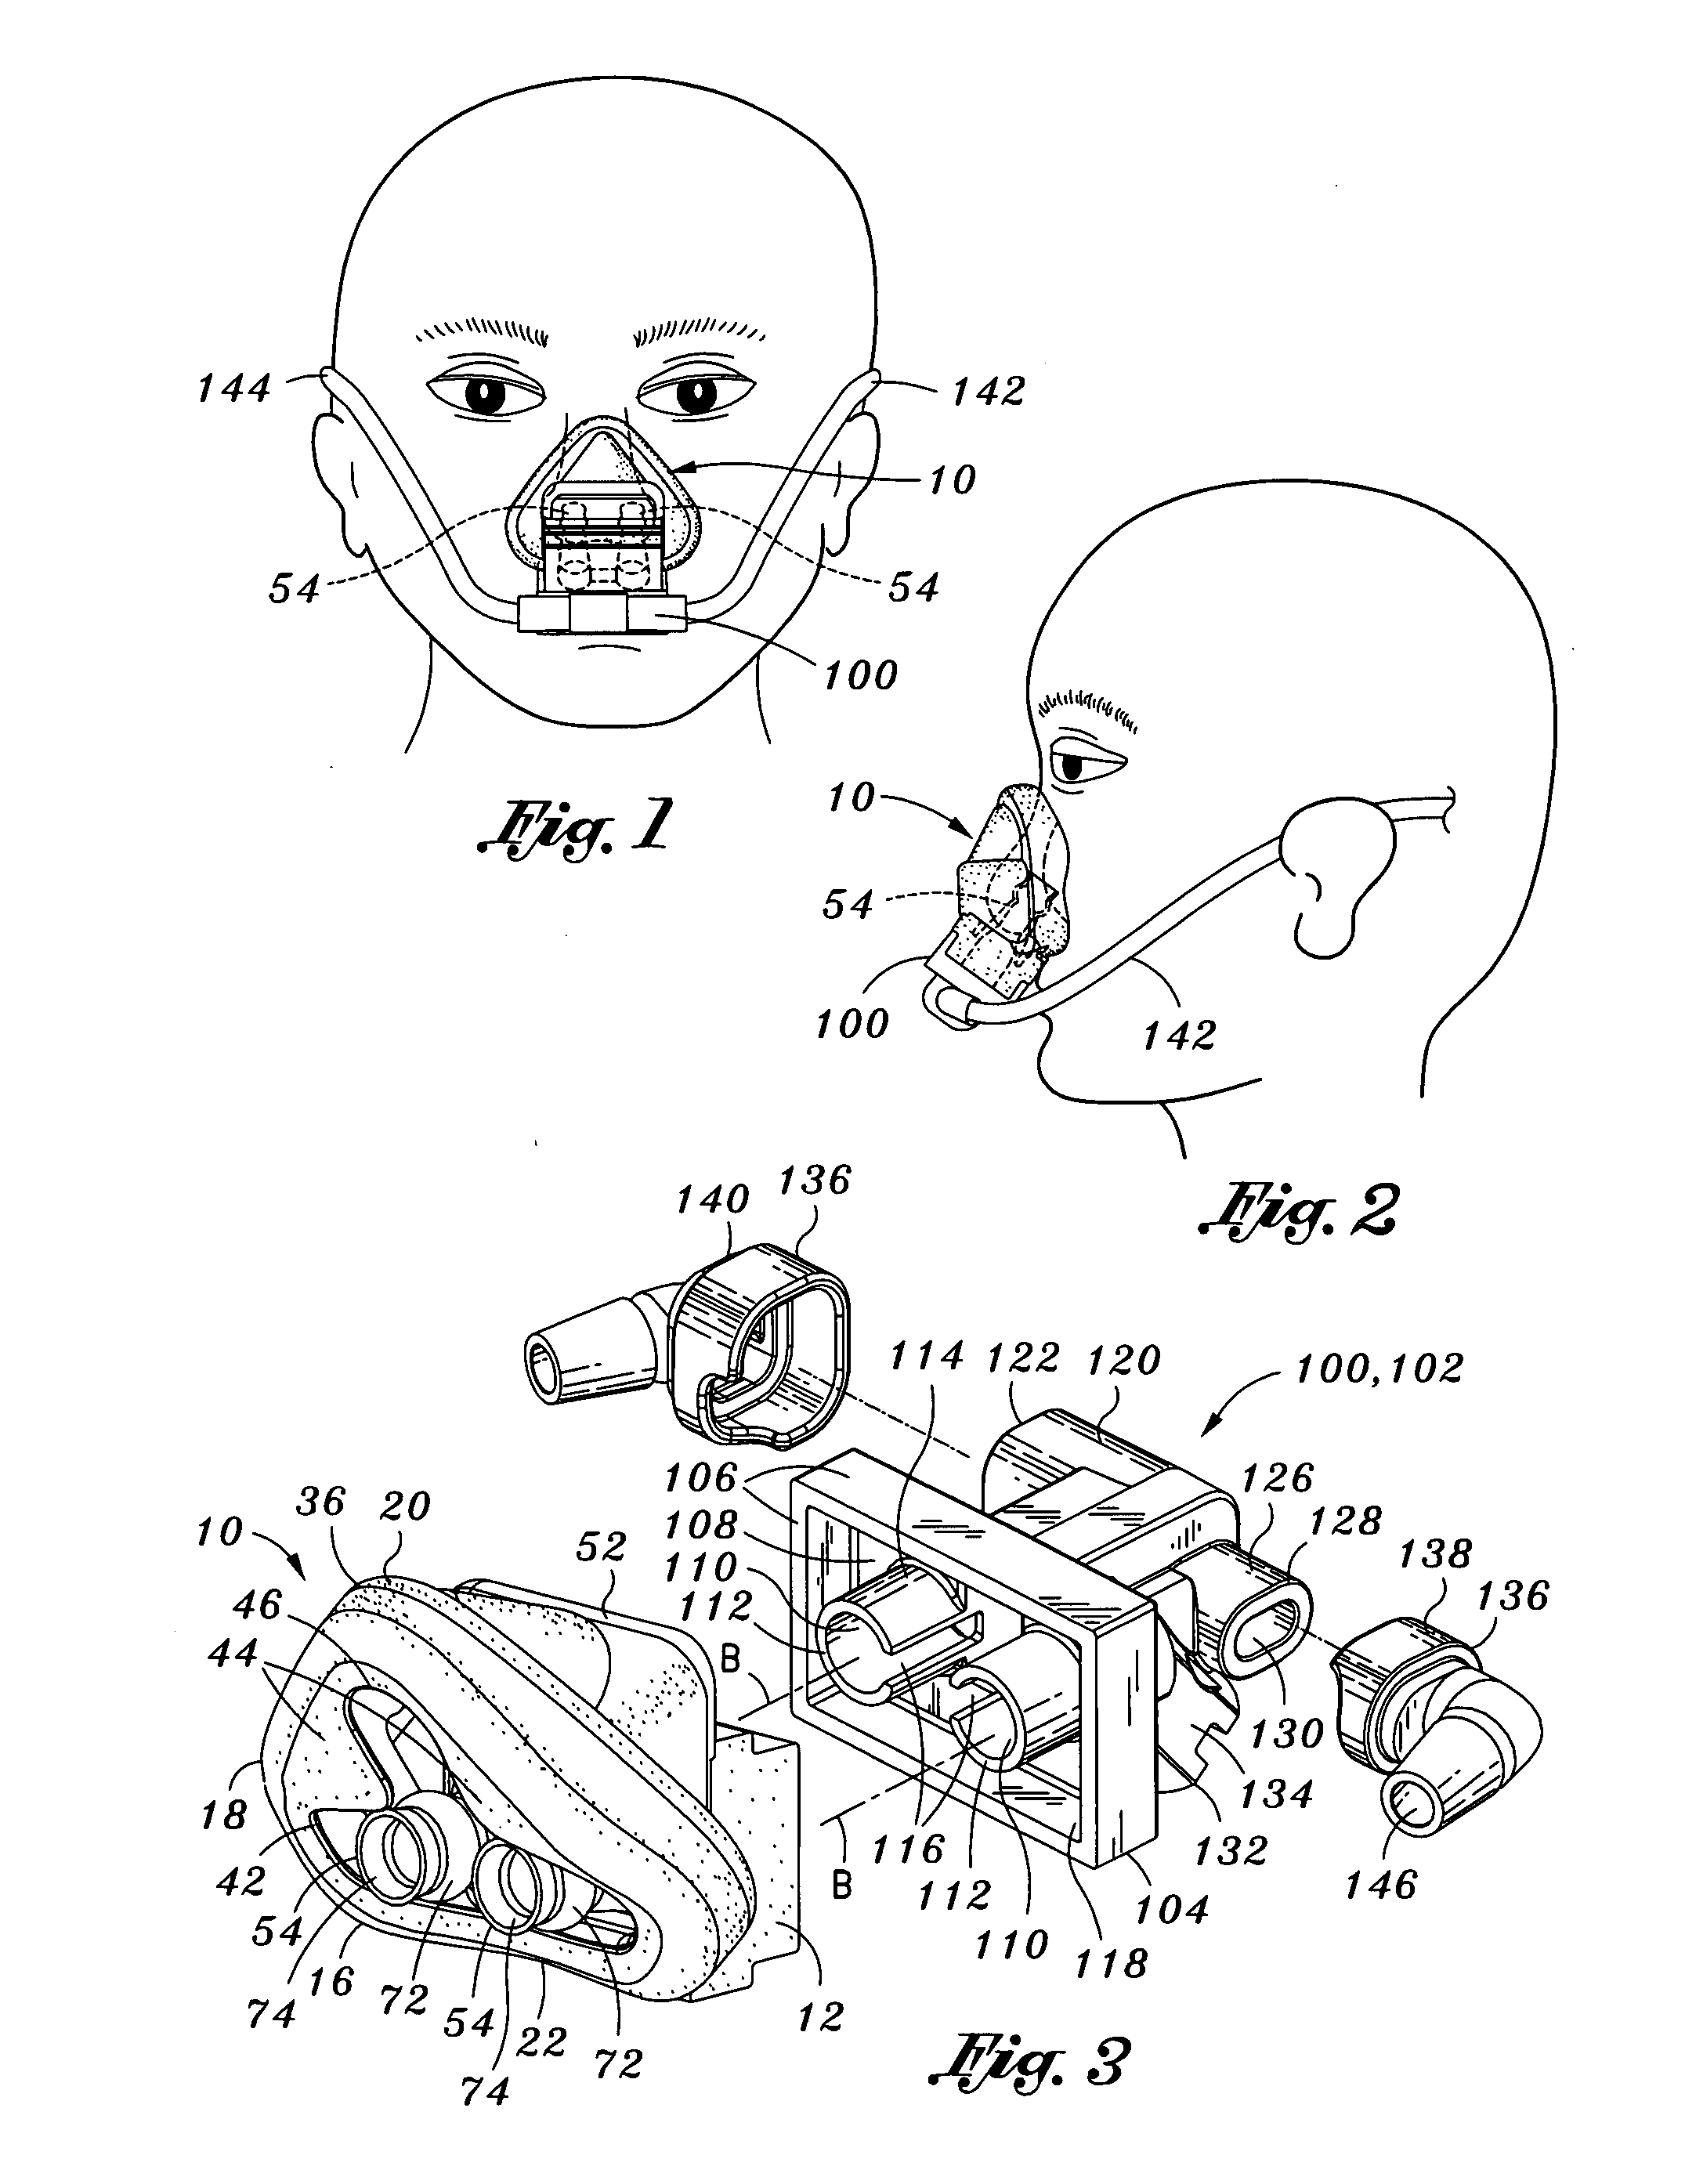 Integrated mask and prongs for nasal CPAP